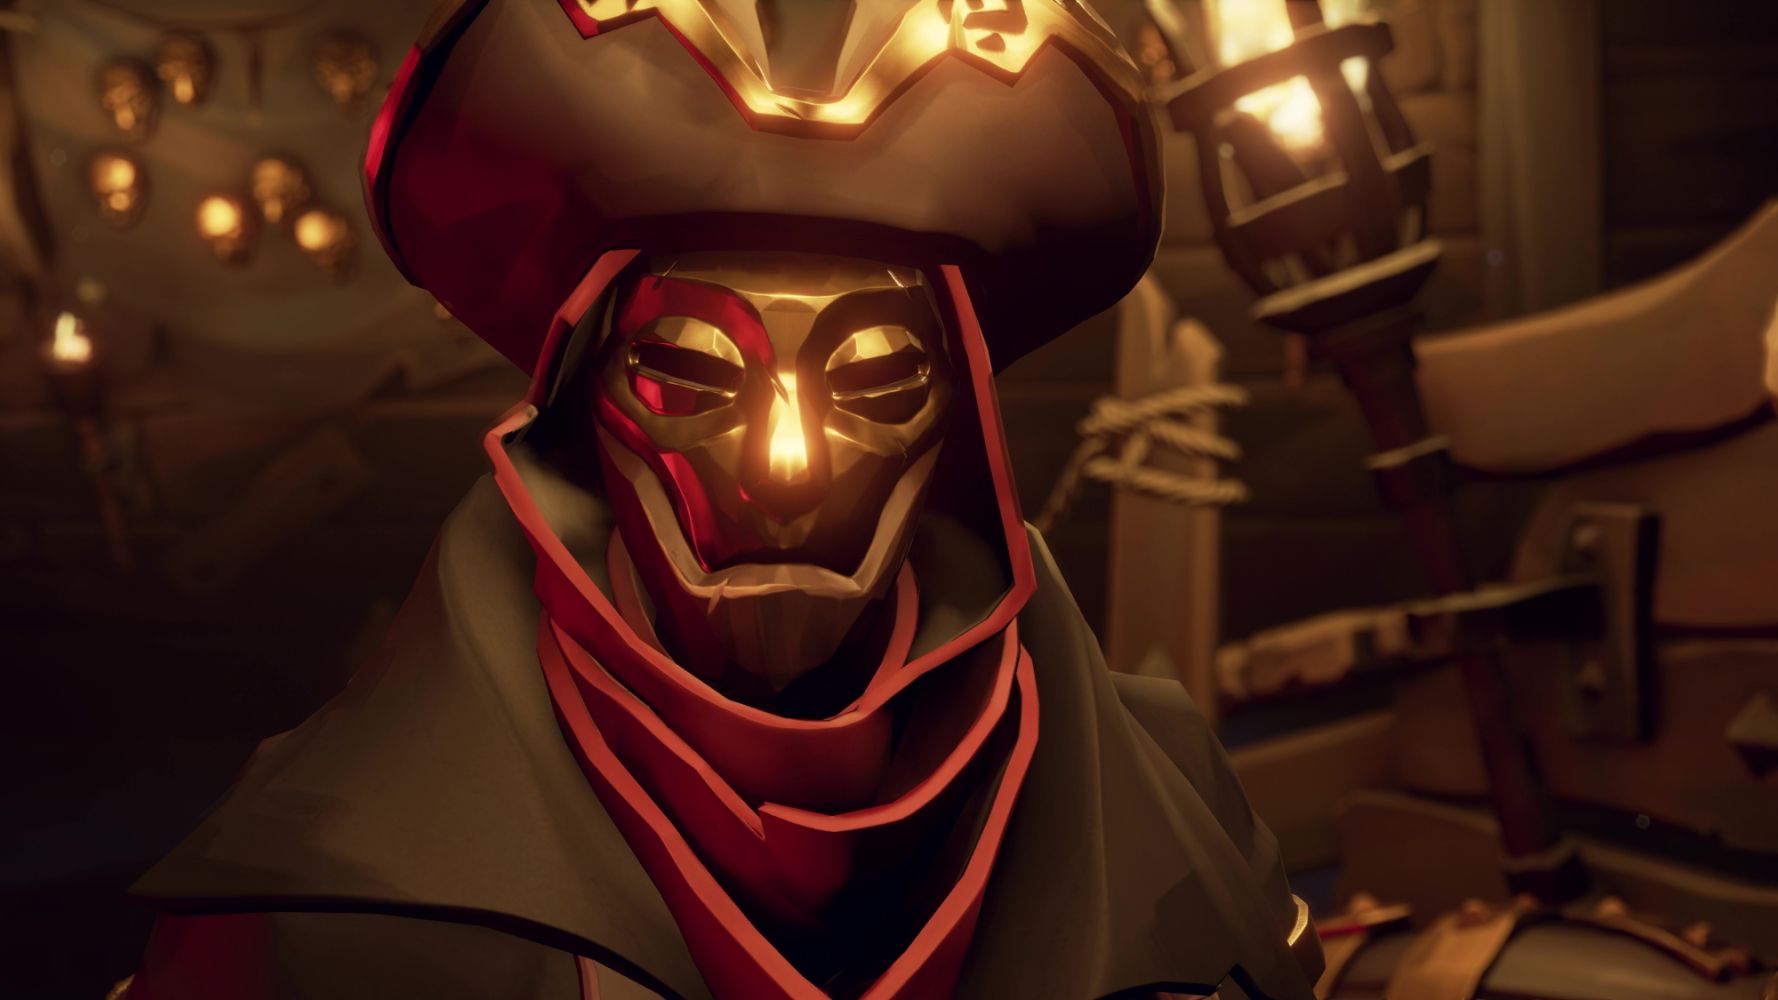 Flameheart Jr. from the Reaper's Alliance in Sea Of Thieves